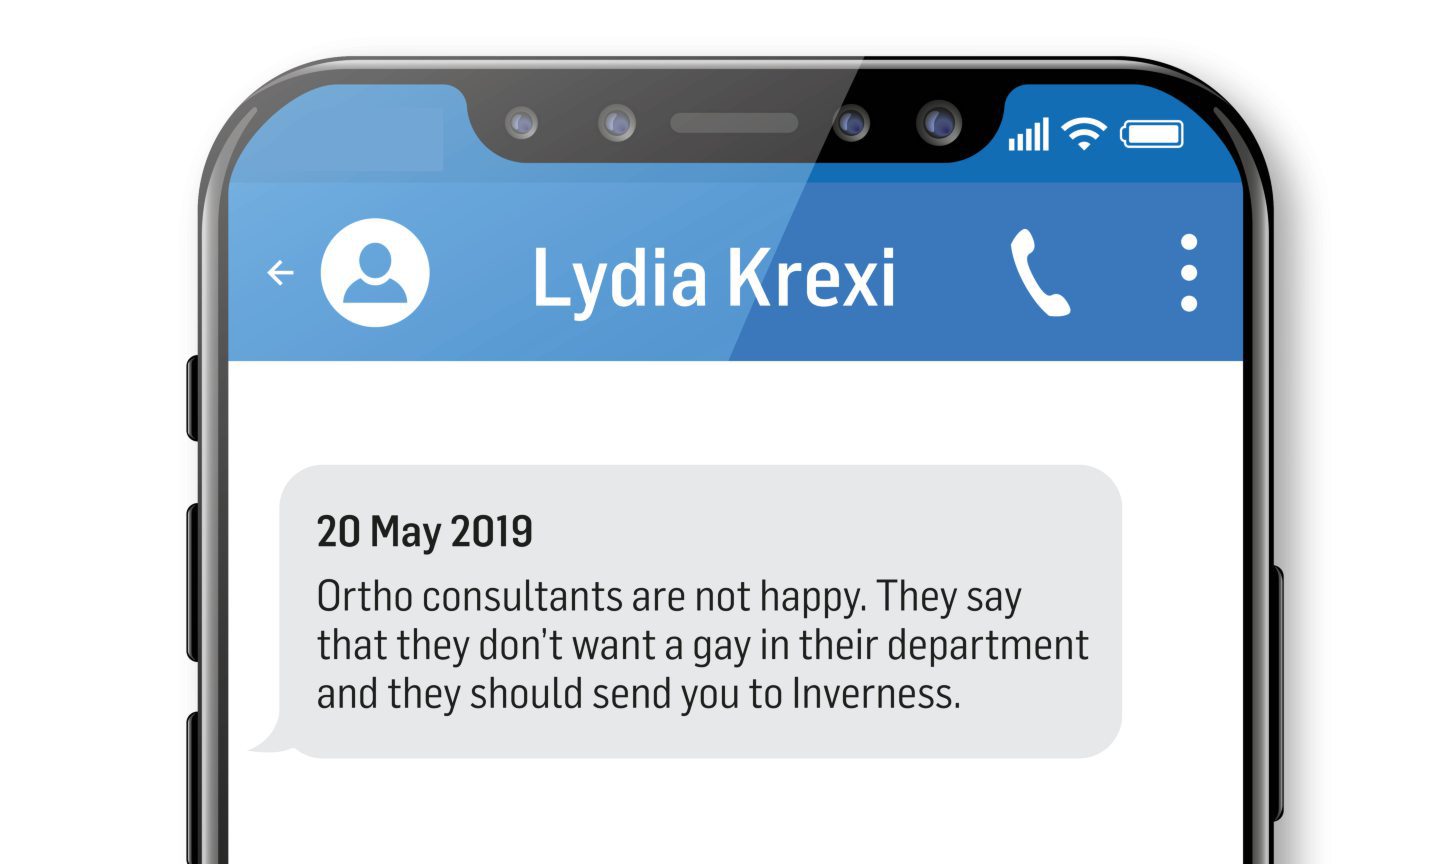 One of the texts from Lydia Krexi: “Ortho consultants are not happy. They say that they don't want a gay in their department and they should send you to Inverness.”